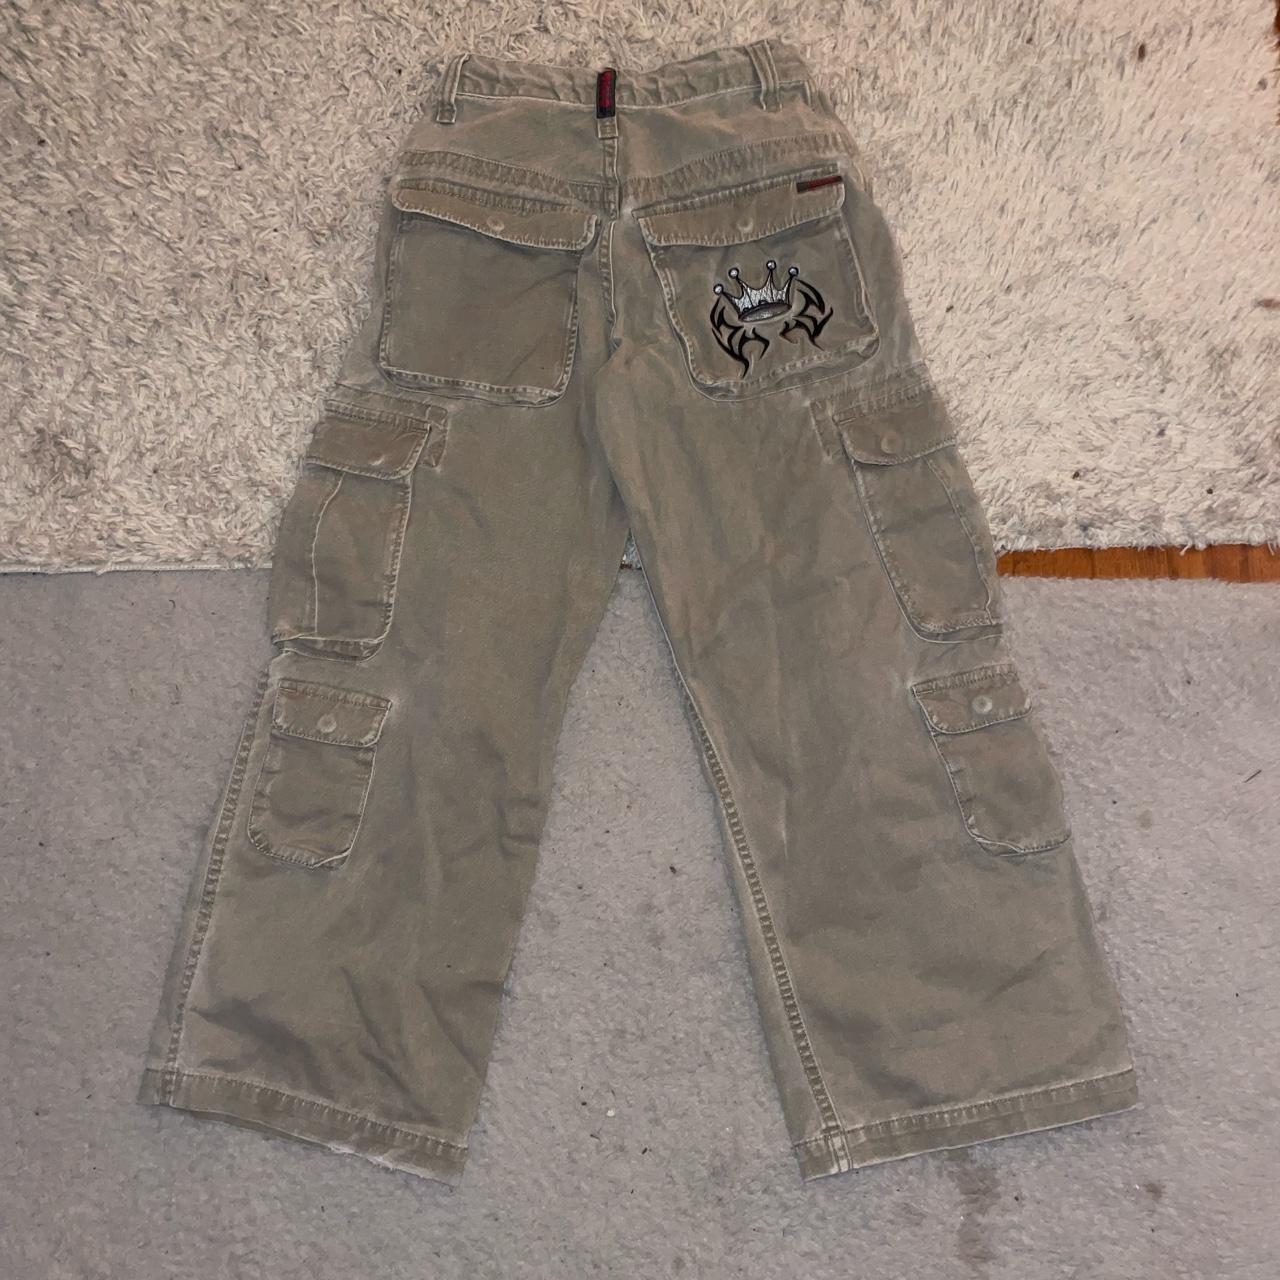 Youth Size 10 JNCO Cargo Pants - Depop